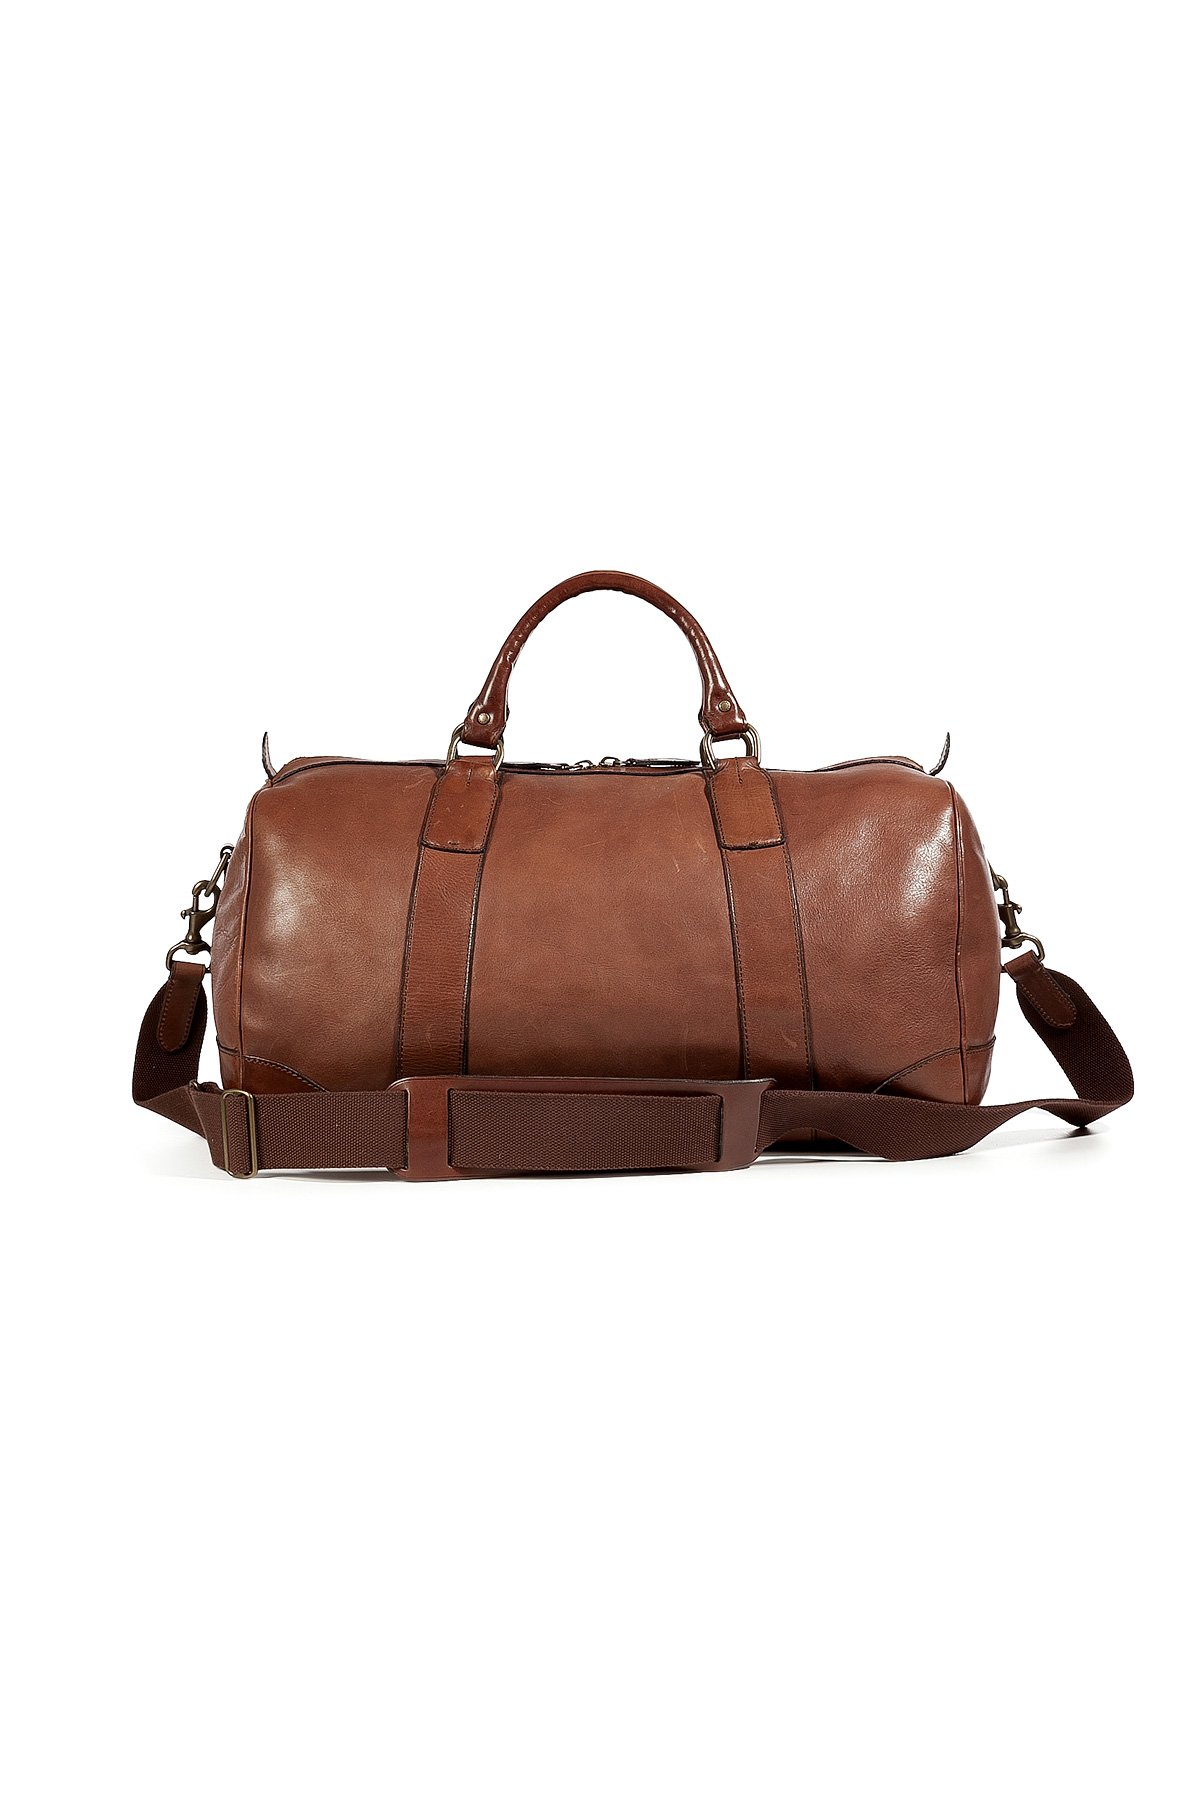 Polo ralph lauren Leather Overnight Duffle Bag in Brown for Men | Lyst